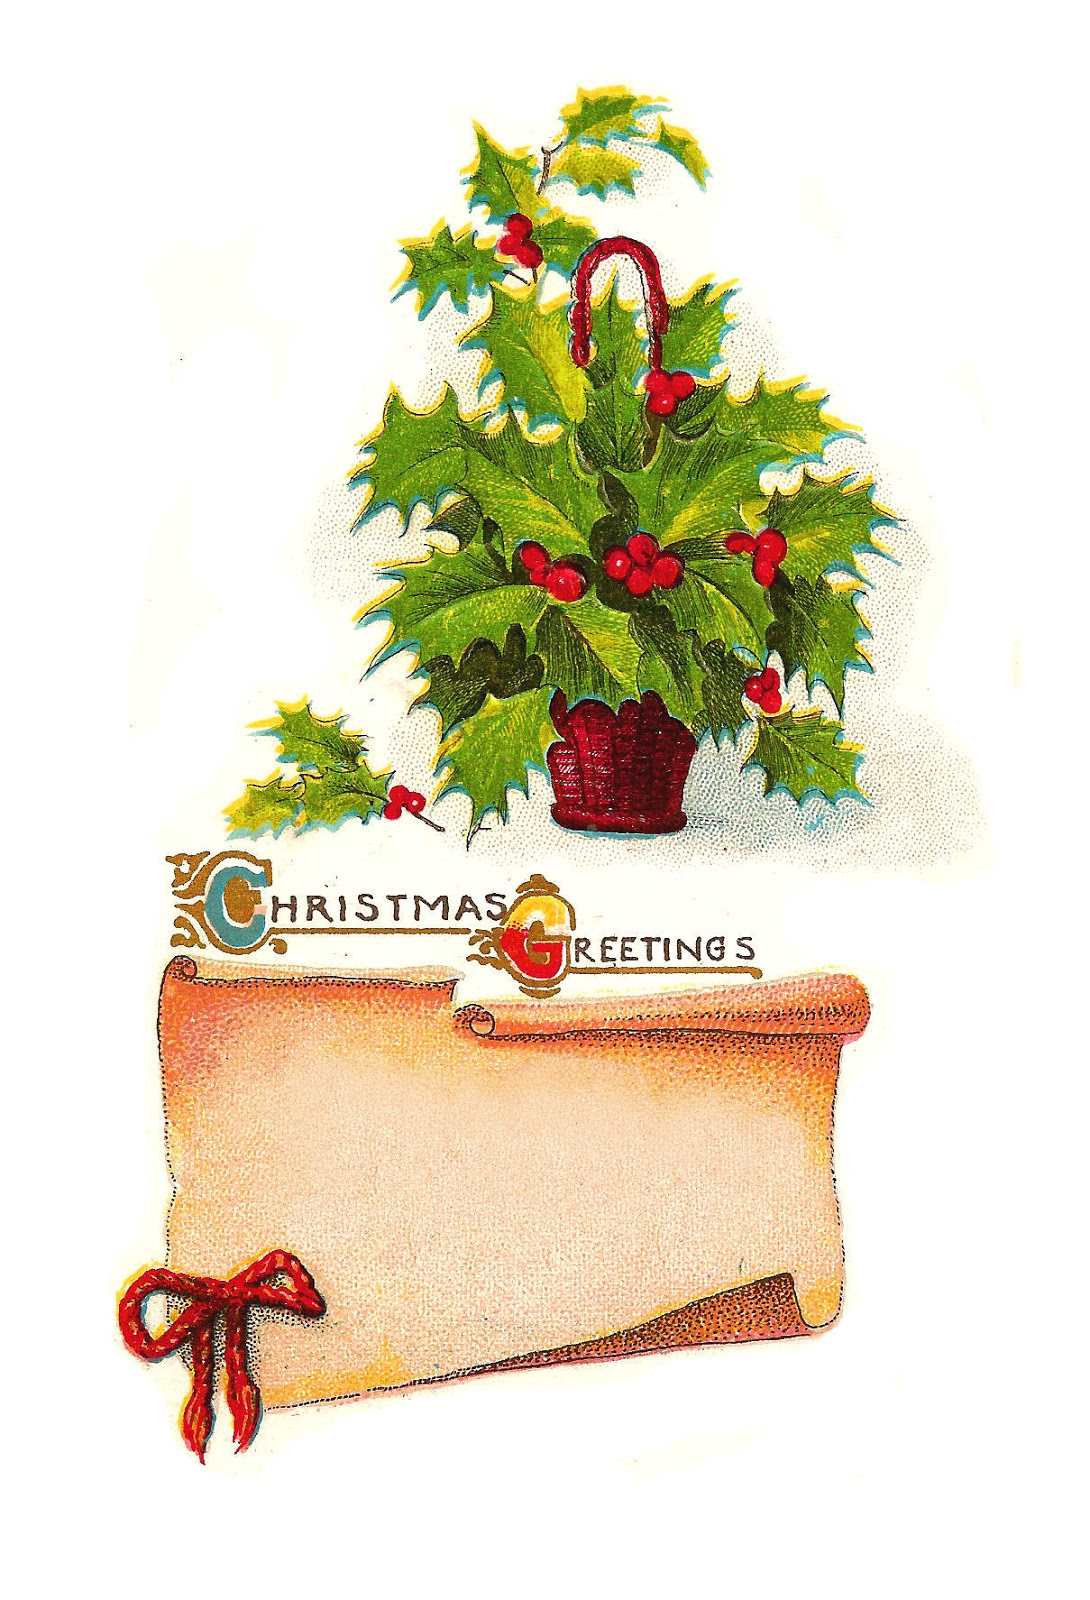 Antique Images: Printable Christmas Label and Card with Holly Plant and ...